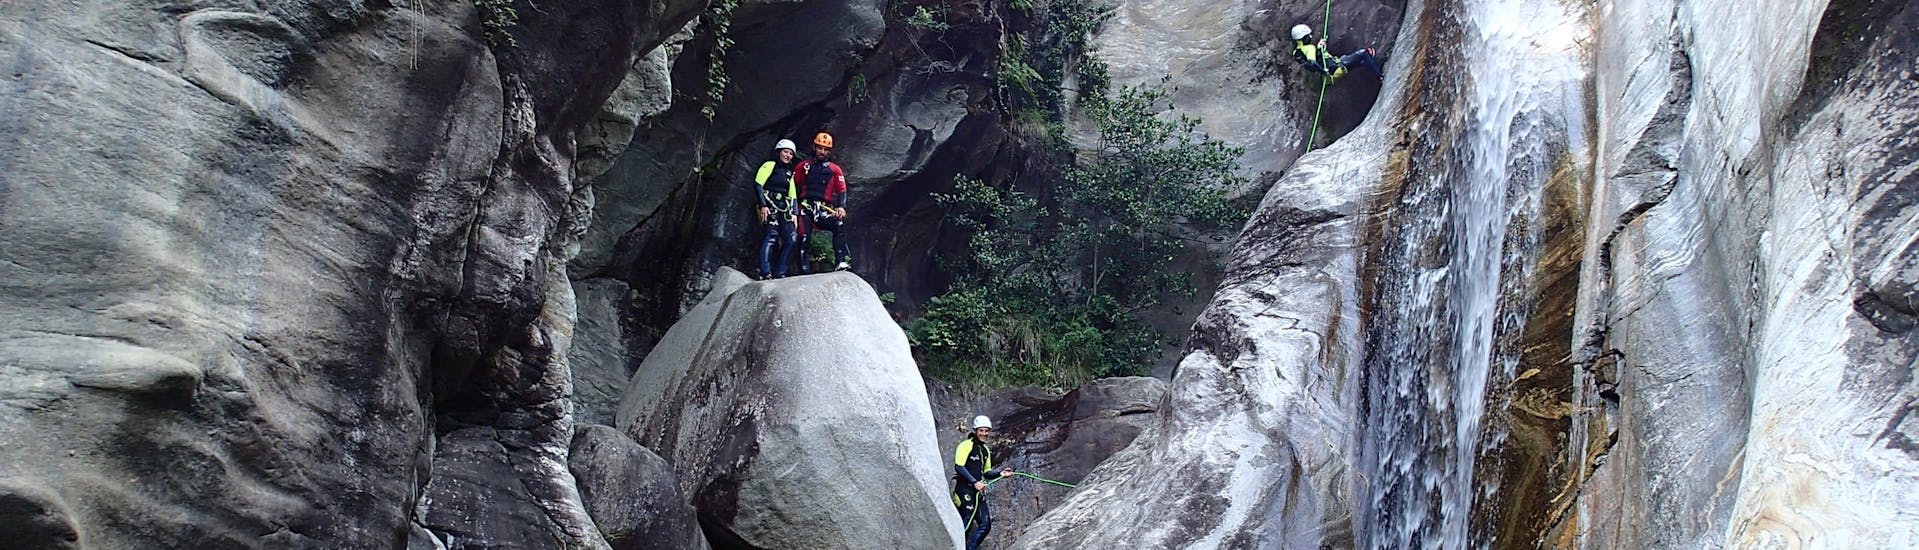 Canyoning in Val Grande in Valle Maggia, Ticino.